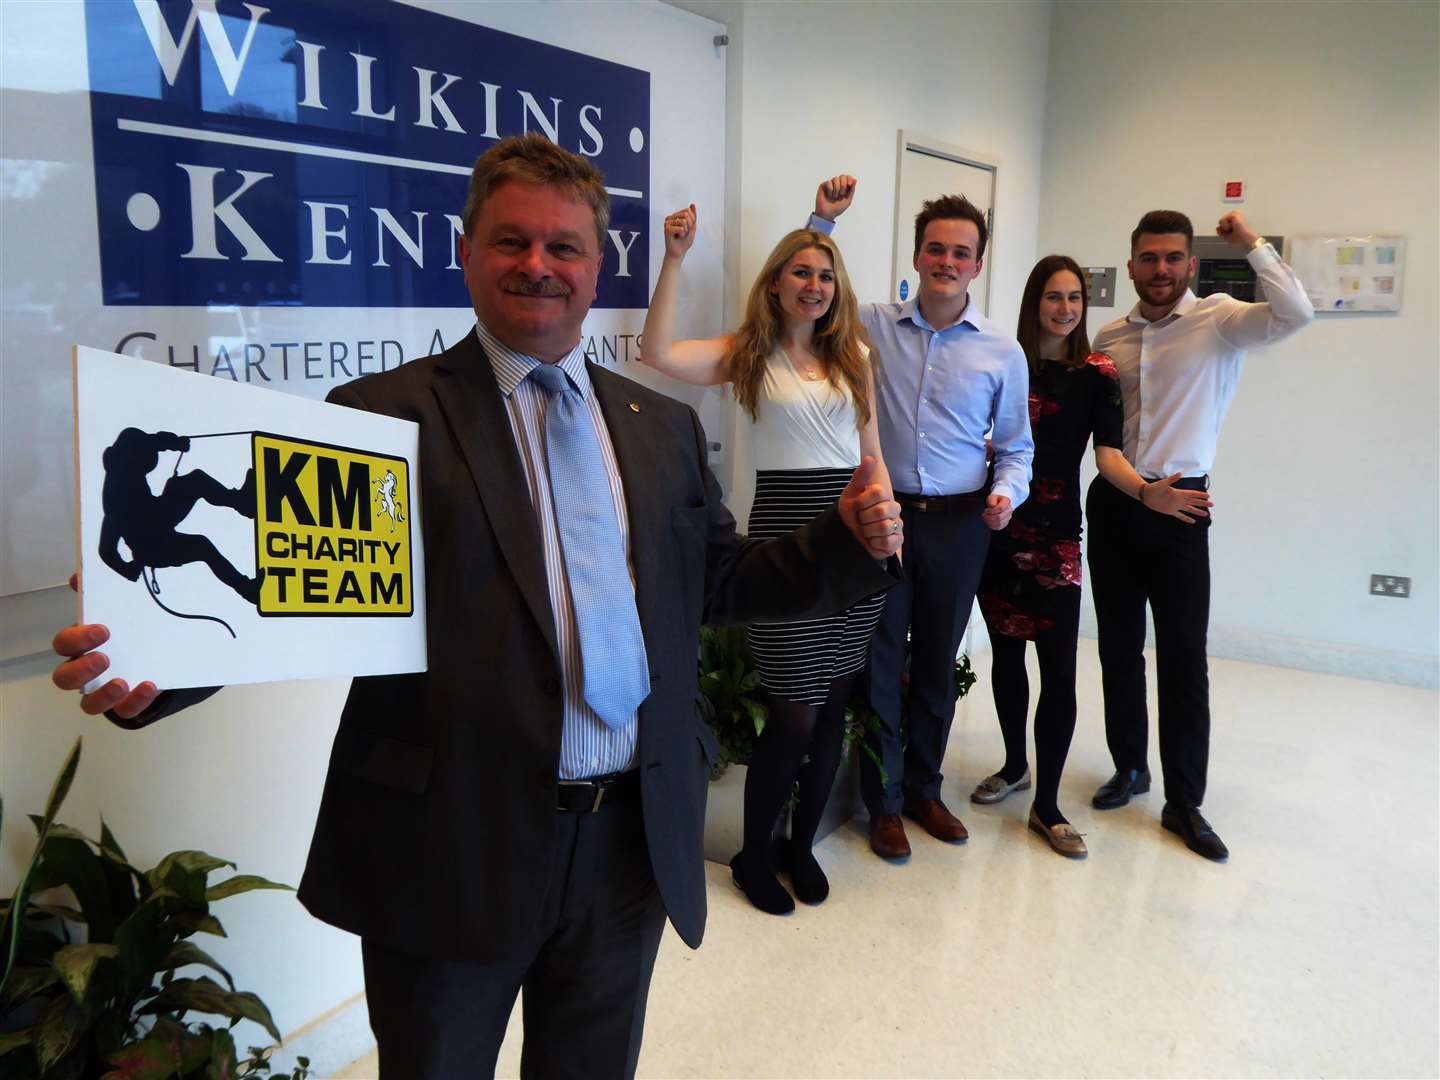 Mike Startup and the Wilkins Kennedy team are supporting the KM Abseil Challenge. (1238688)